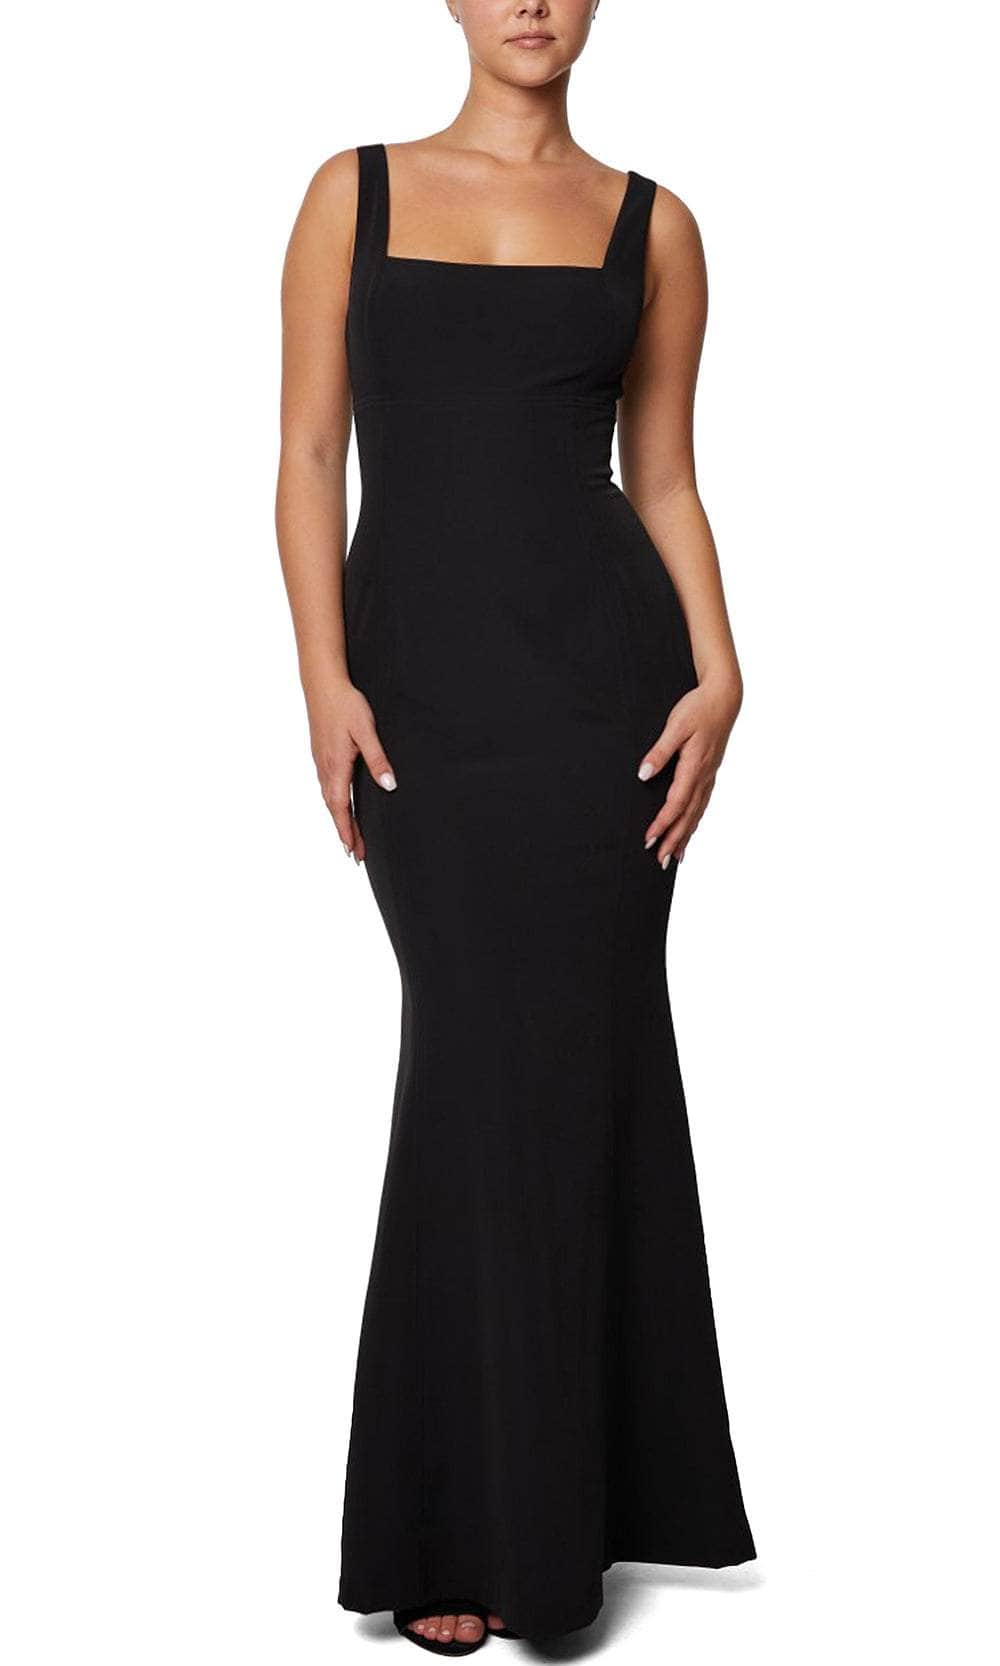 Laundry HT01W26 - Square Neck Fitted Evening Gown Prom Dresses 0 / Black